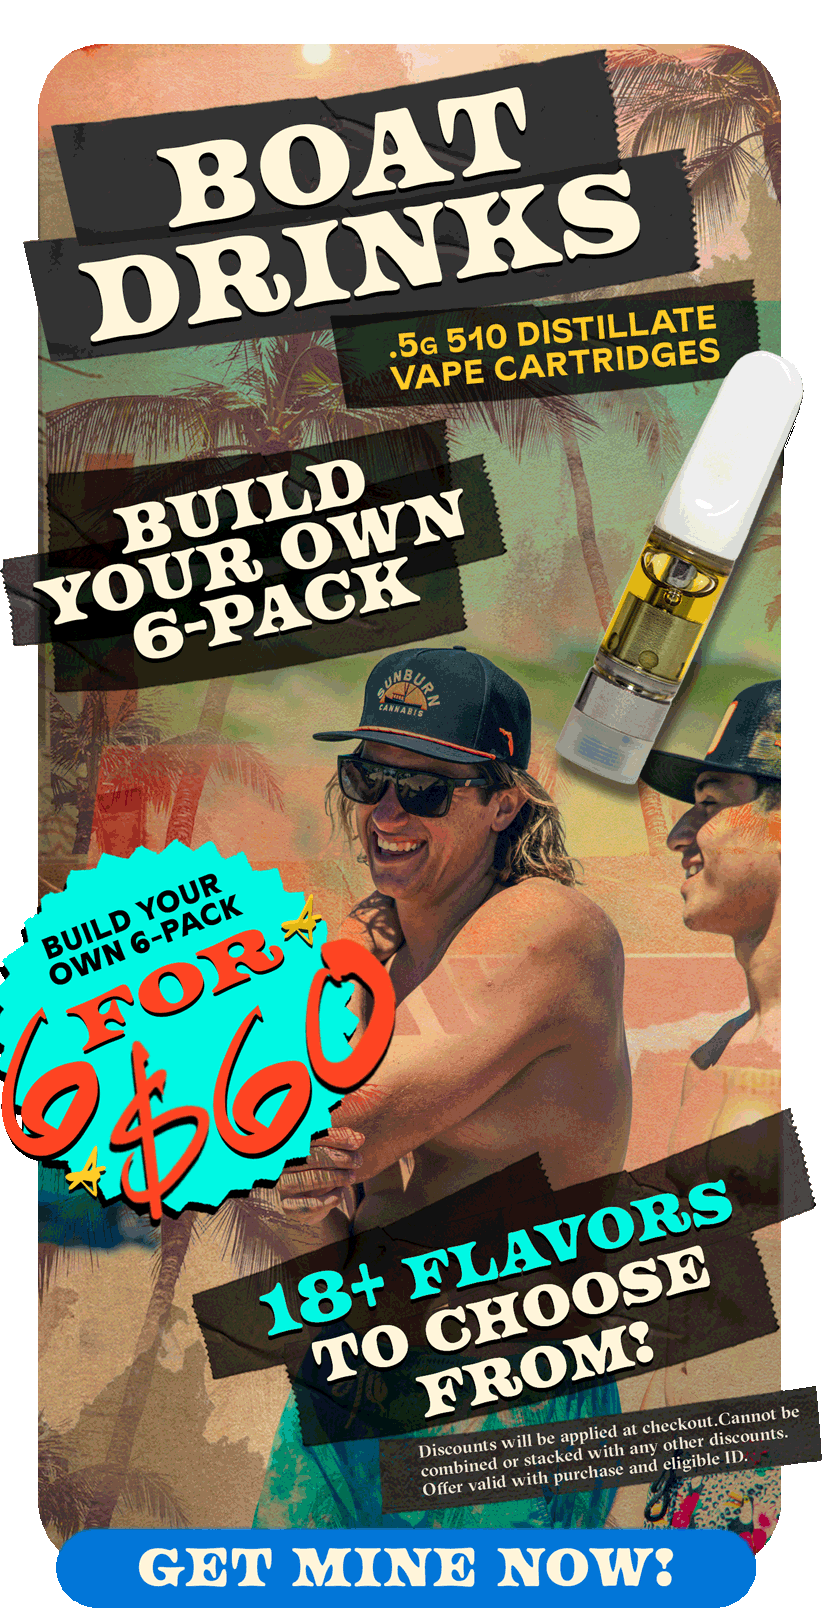 Boat Drinks Build Your Own 6 Pack for$60 cincoDeMayo Blank